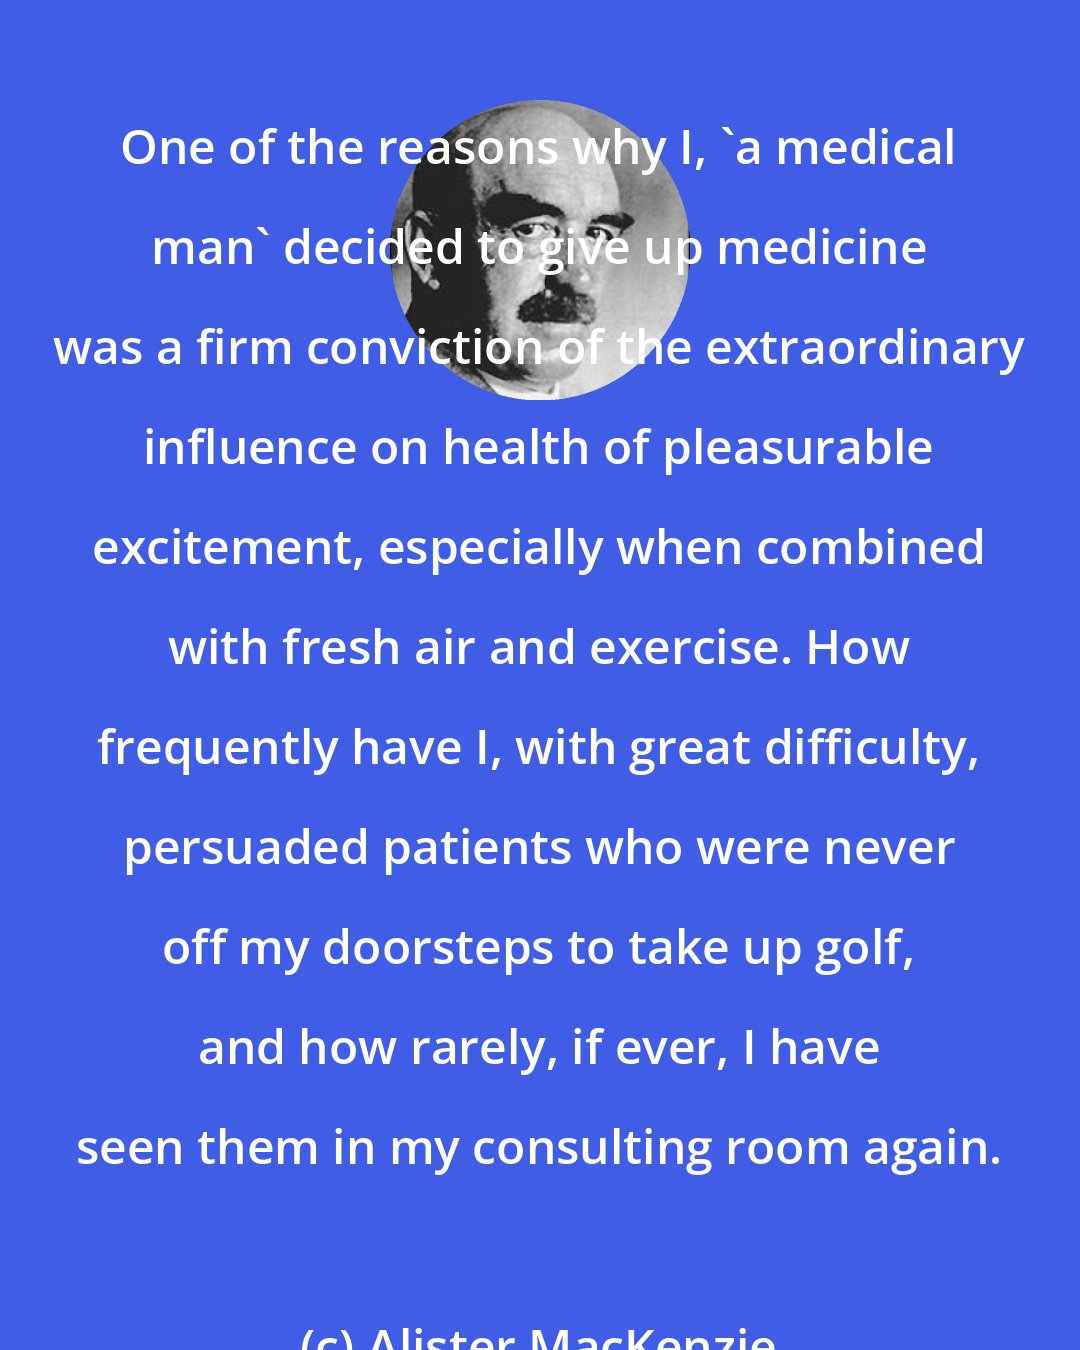 Alister MacKenzie: One of the reasons why I, 'a medical man' decided to give up medicine was a firm conviction of the extraordinary influence on health of pleasurable excitement, especially when combined with fresh air and exercise. How frequently have I, with great difficulty, persuaded patients who were never off my doorsteps to take up golf, and how rarely, if ever, I have seen them in my consulting room again.